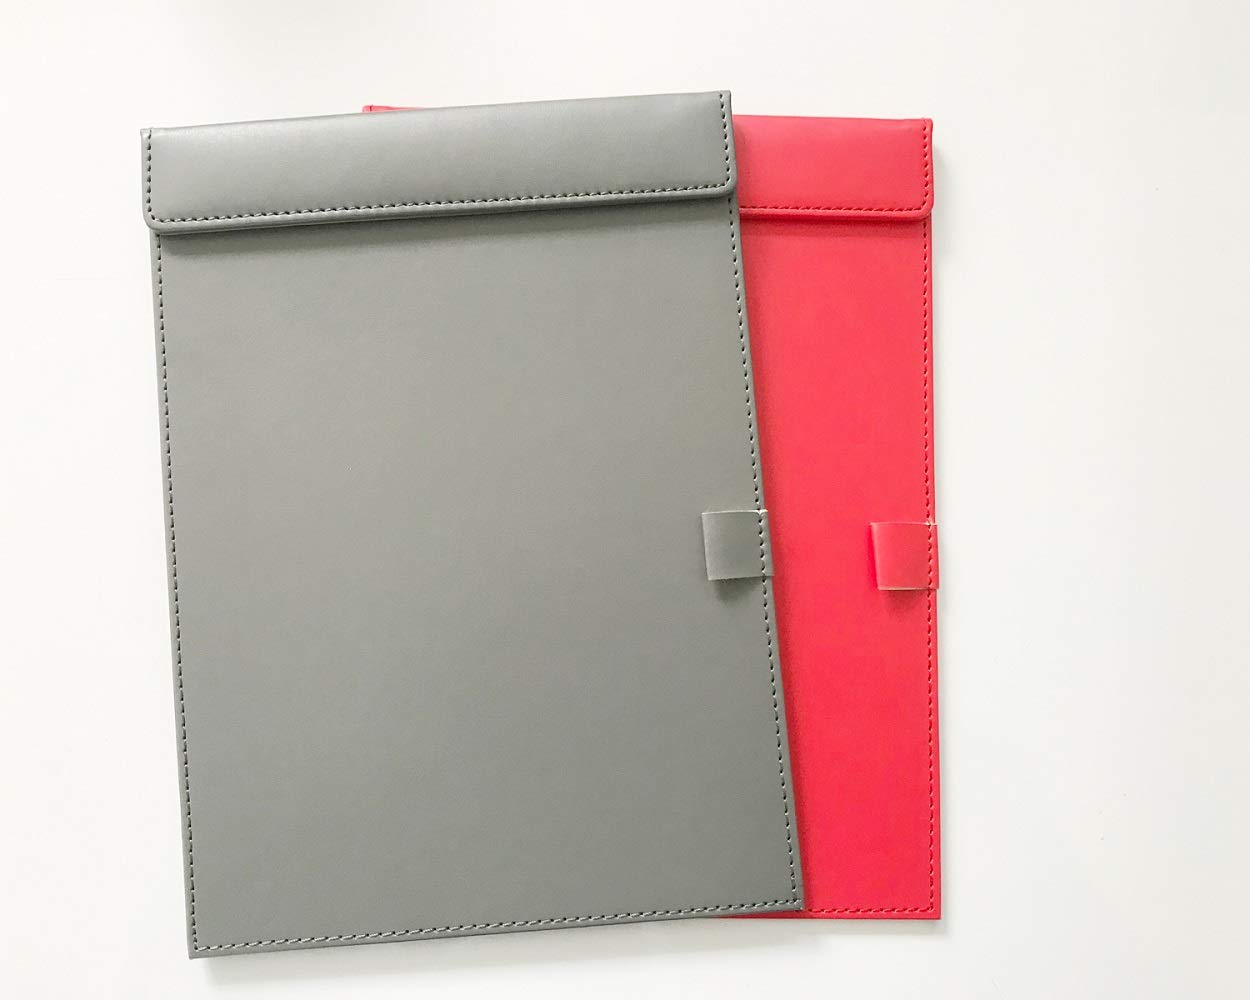 NJ Super Smooth PU Leather Conference Writing Pad Clipboard, Business Meeting Magnetic Pad with Pen Holder: 2 Pcs Set : Gray, Red